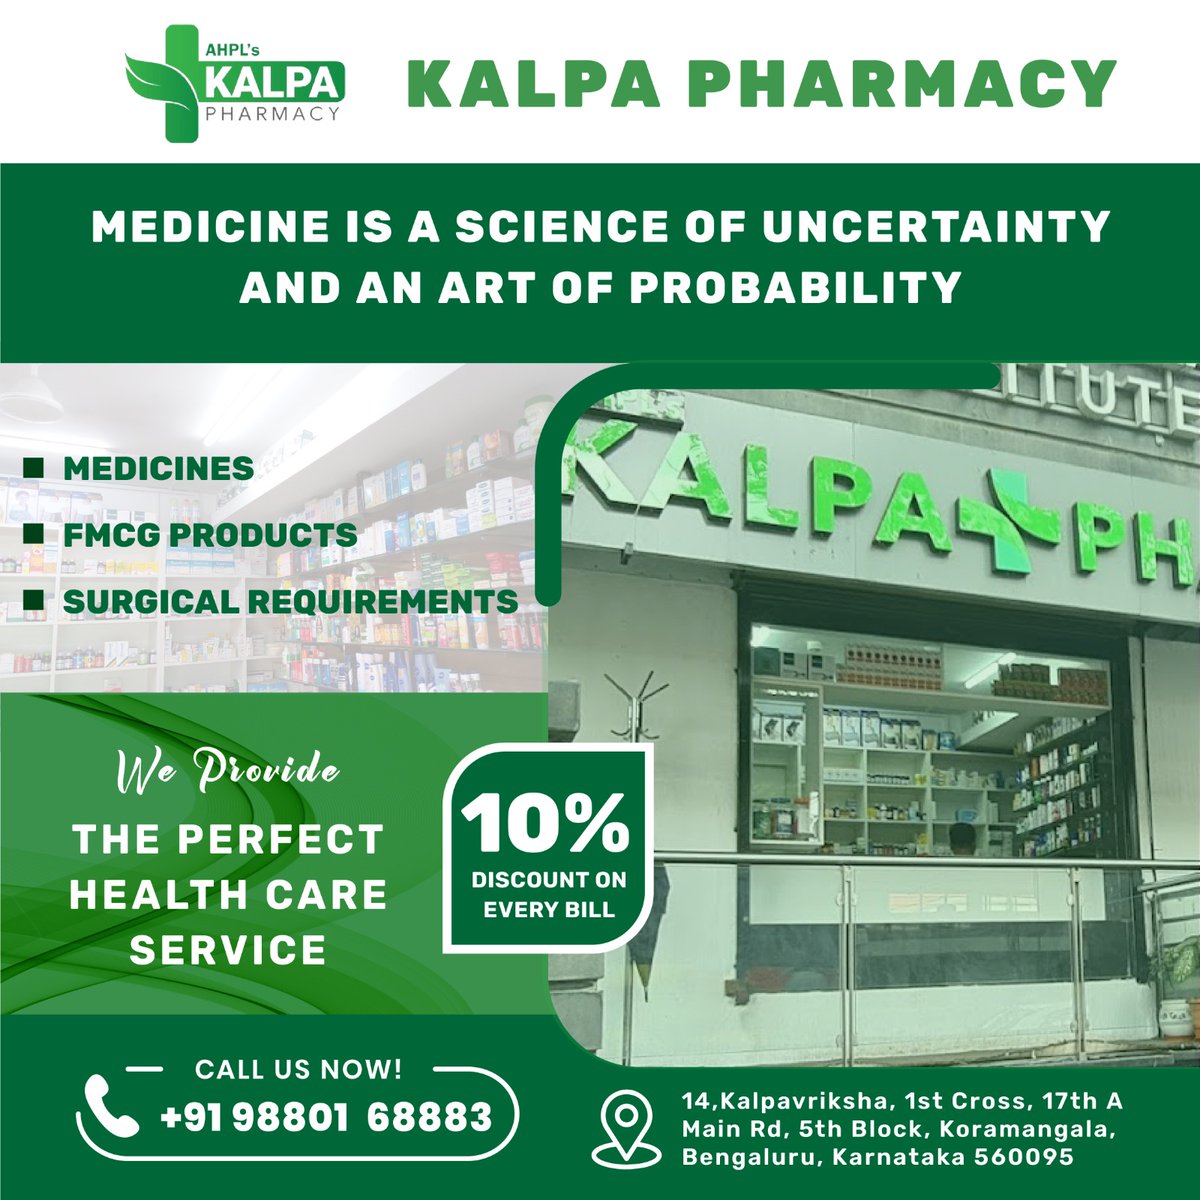 Your health, our priority! Visit our pharmacy for personalized care and expert advice.  10% Discount on every bill  Call us at +91 98801 68883  #pharmacycare #healthfirst #wellnessjourney #healthiswealth #medicationmanagement #healthyliving #healthcare #wellnesscommunity #healthy